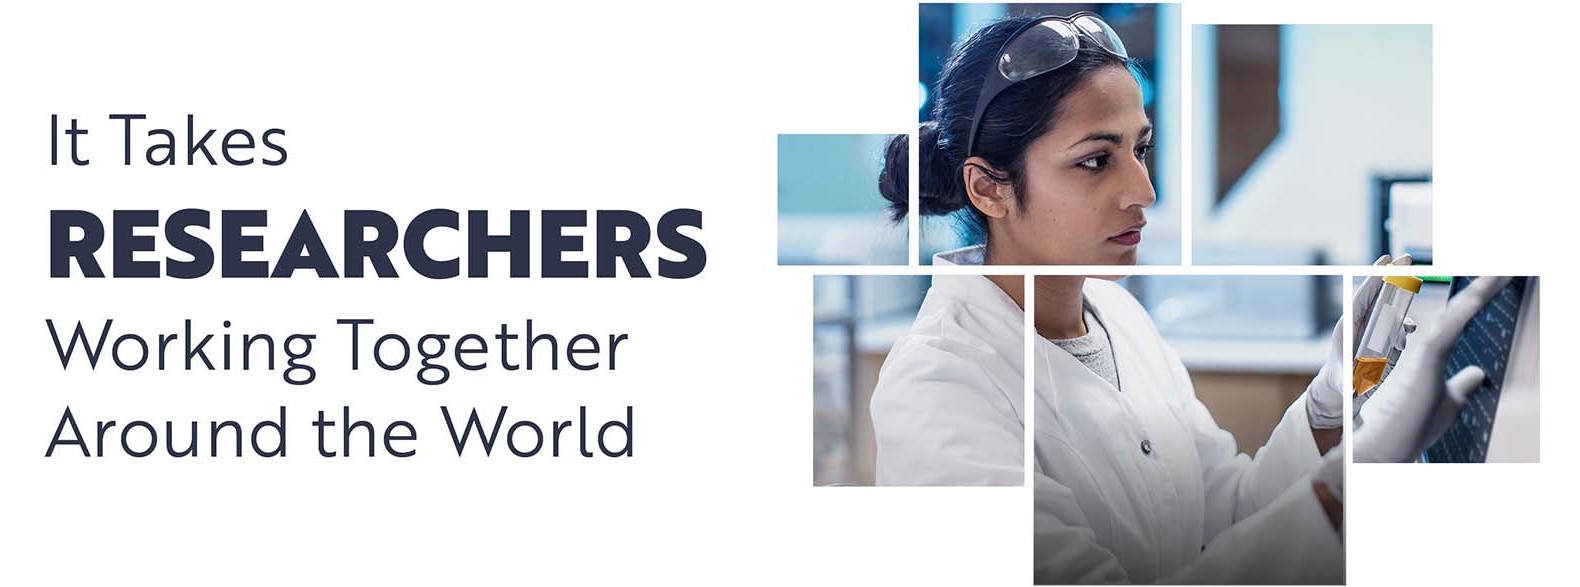 It Takes Researchers Working Together Around the World